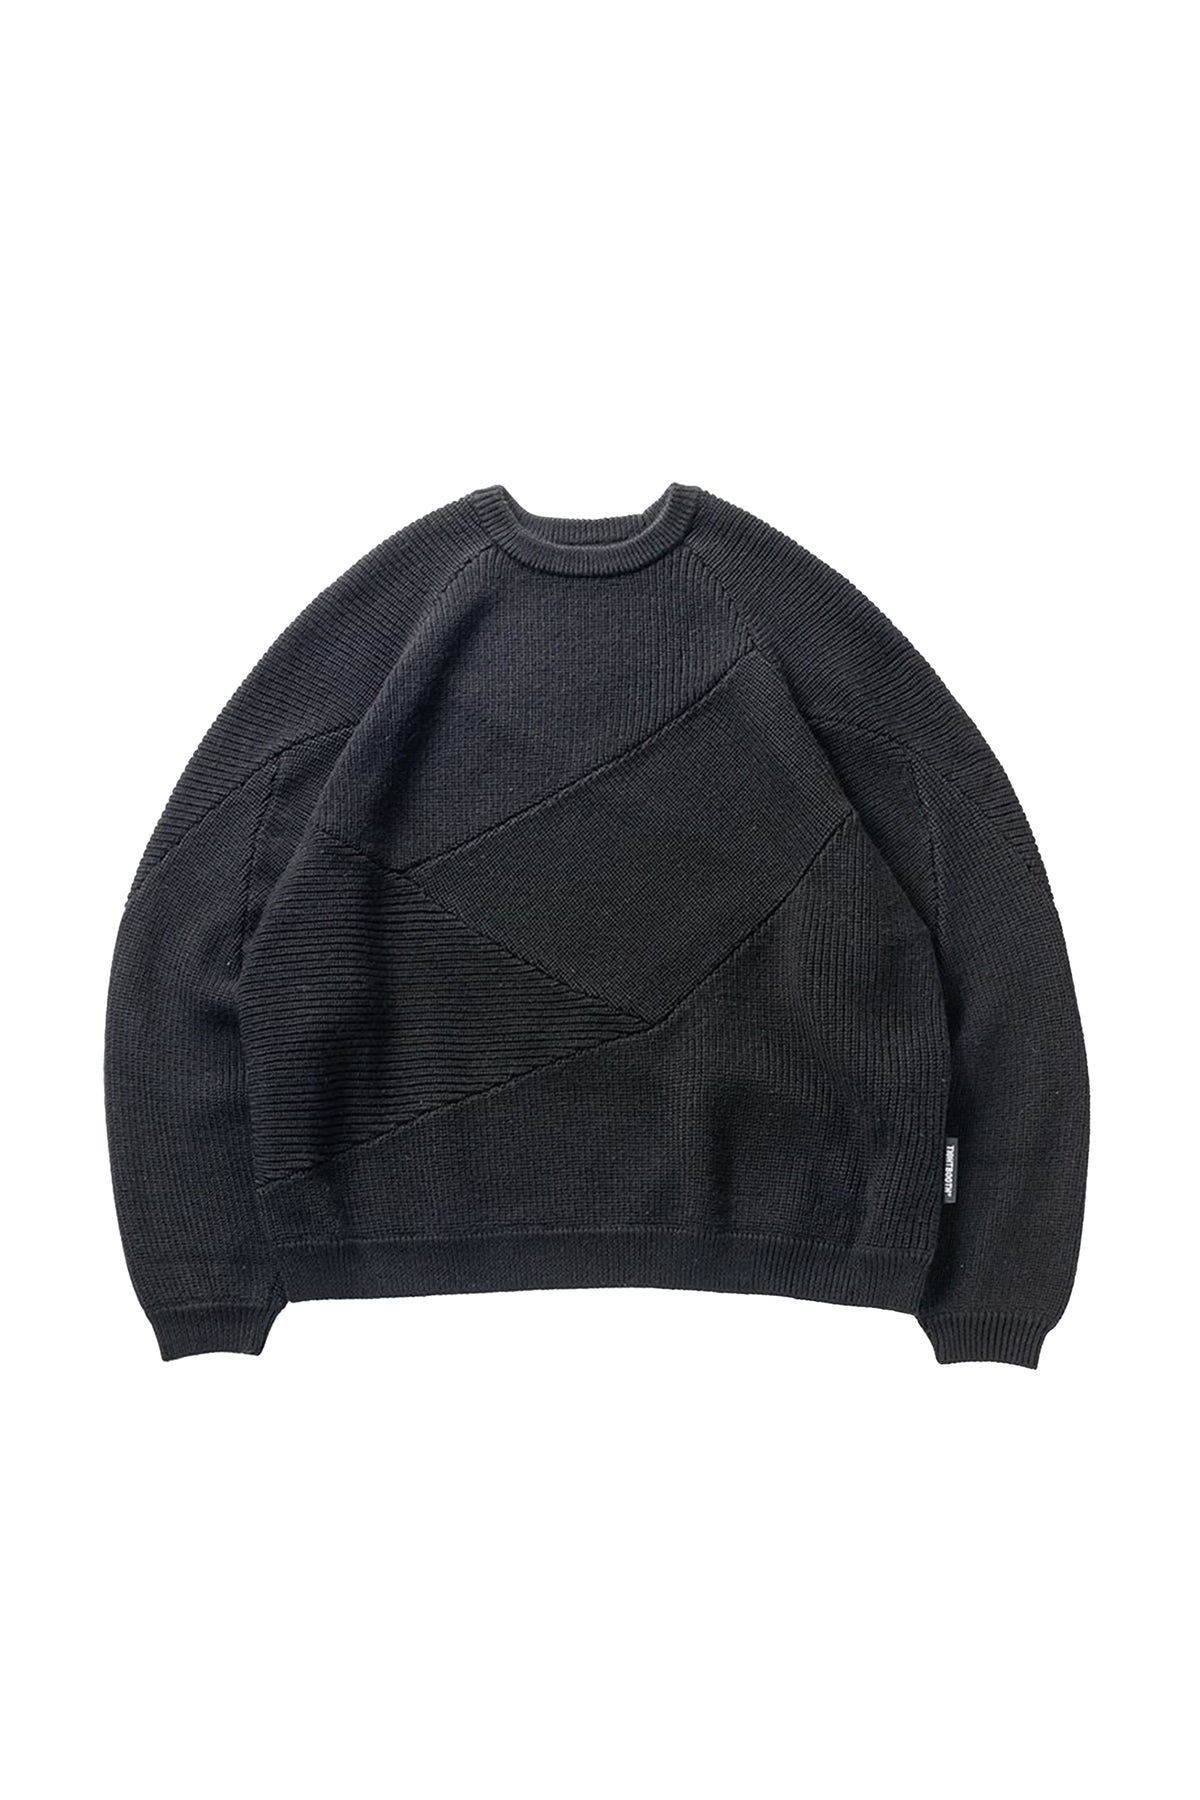 TIGHTBOOTH SPLICE KNIT SWEATER / BLK